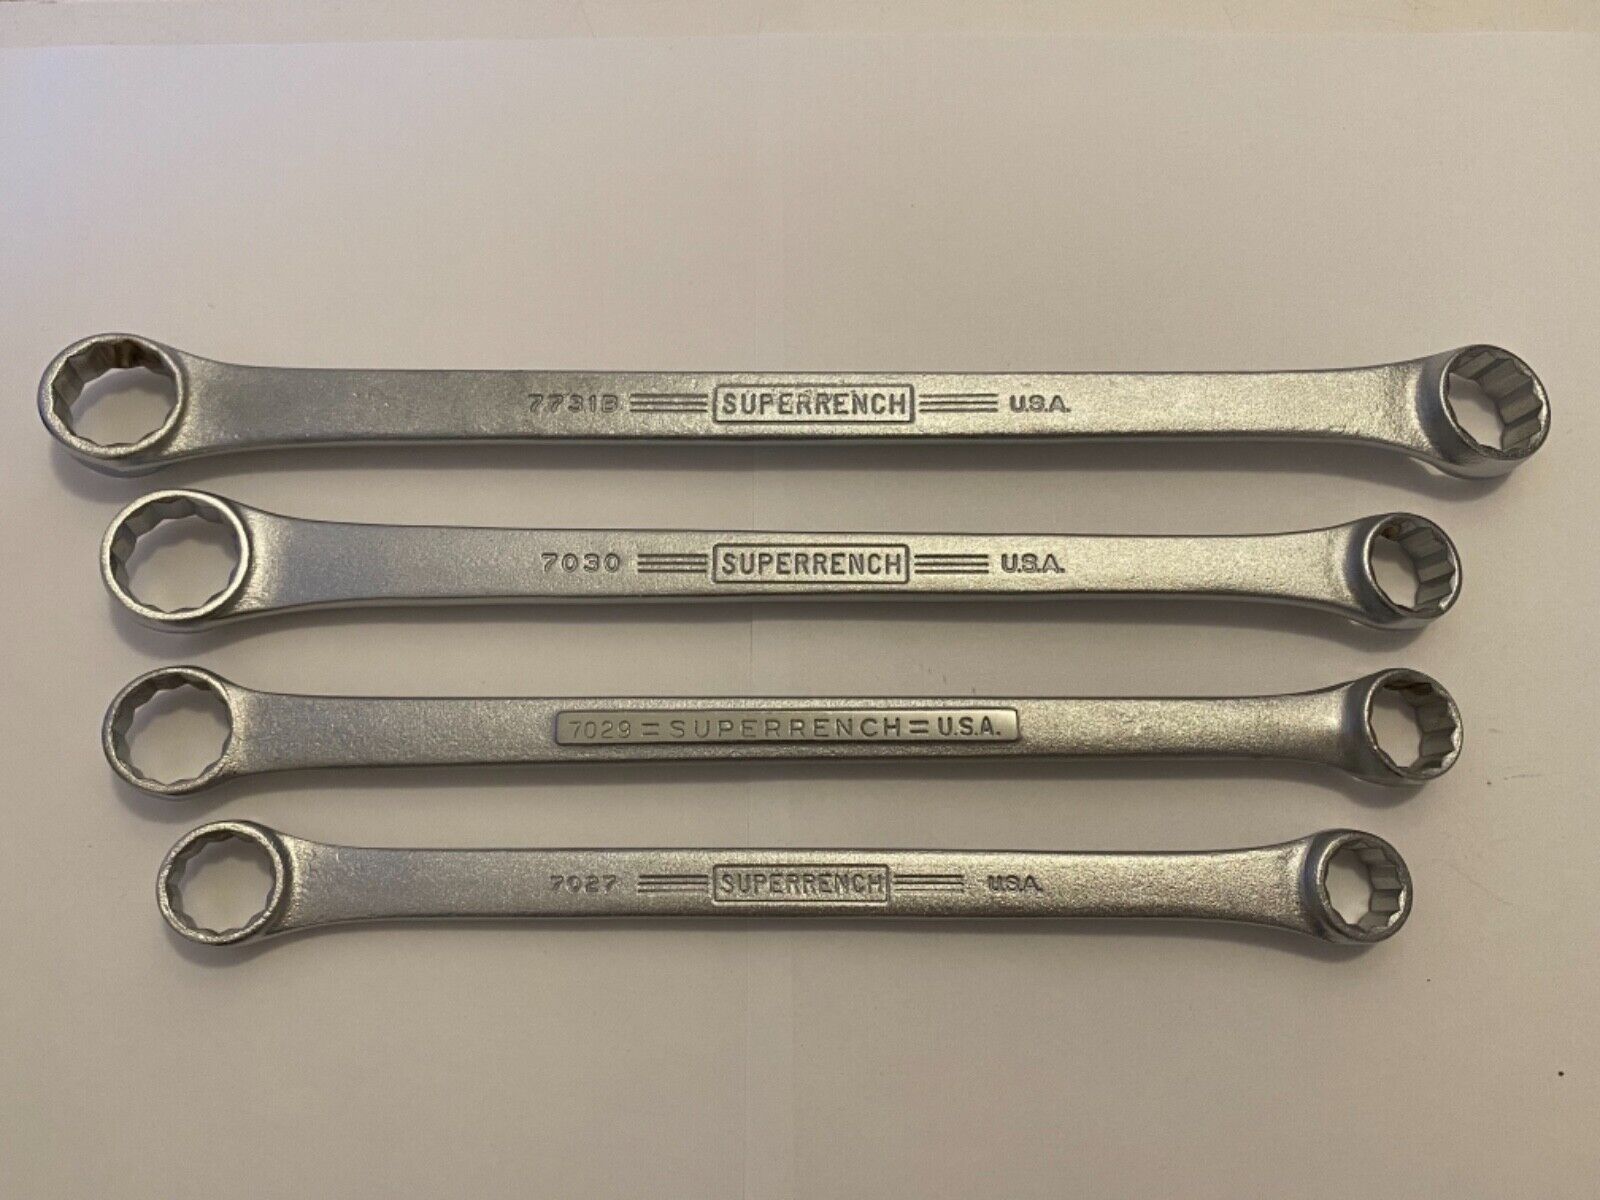 WILLIAMS (4 PCS.) DOUBLE END “SUPERRENCH” BOX WRENCHES - USA - NEW - 